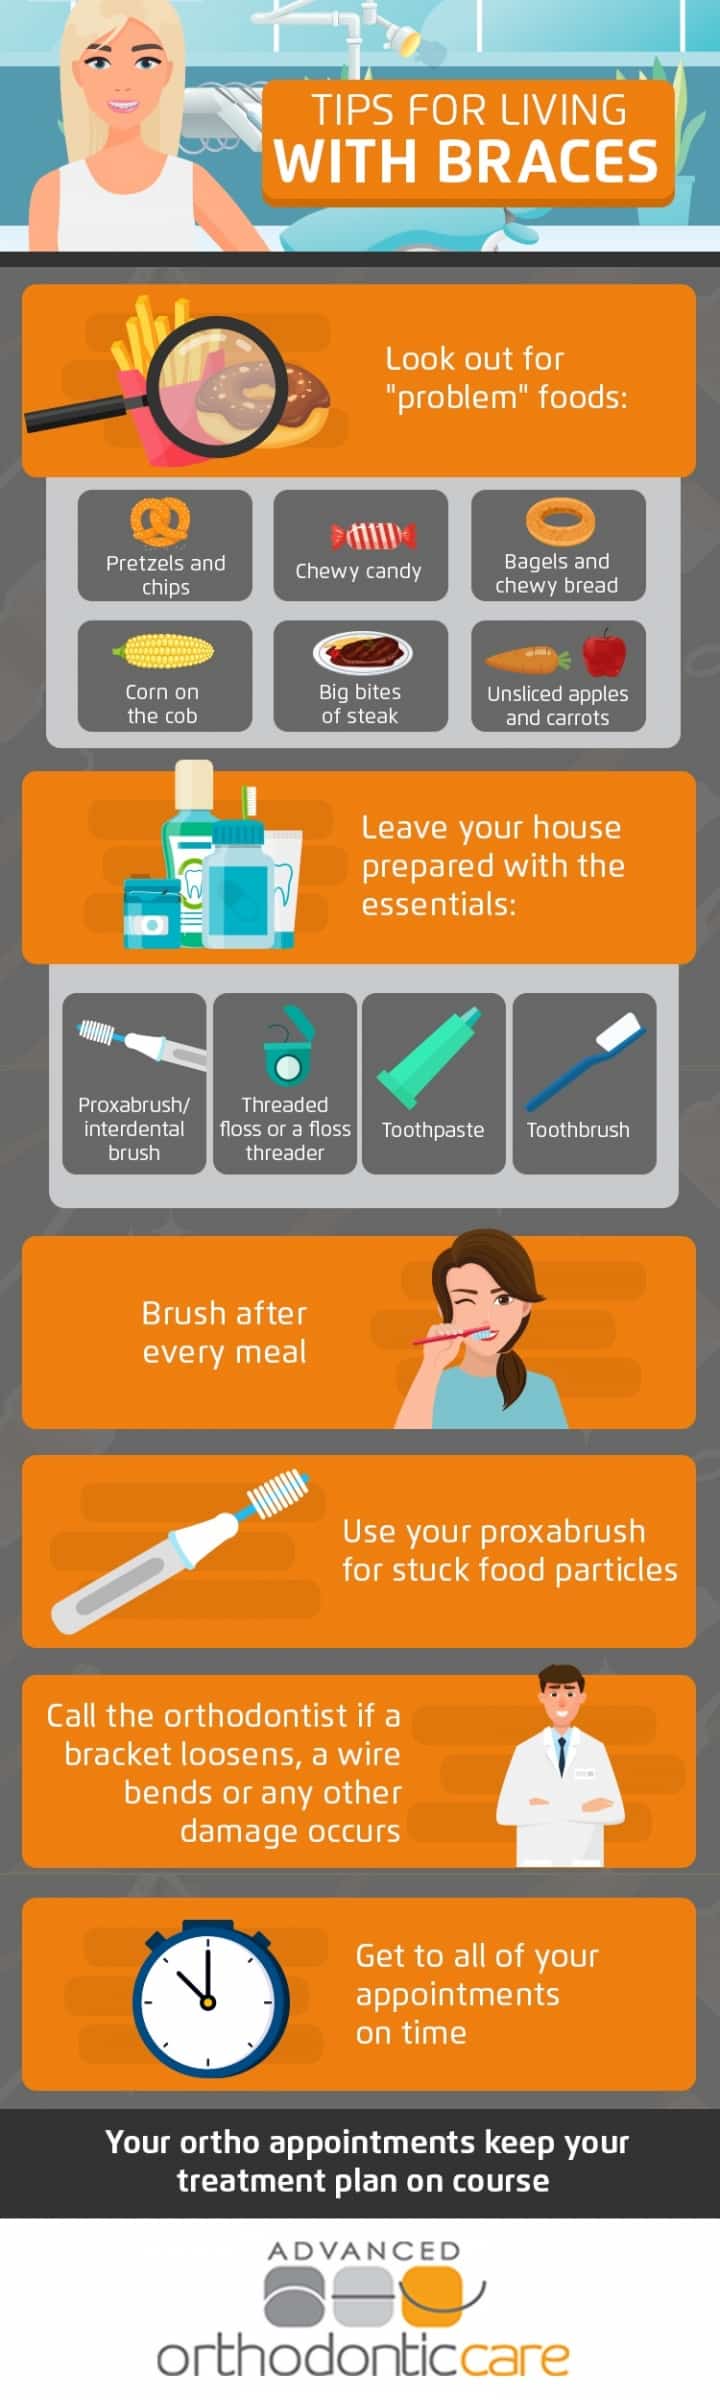 infographic tips for living with braces